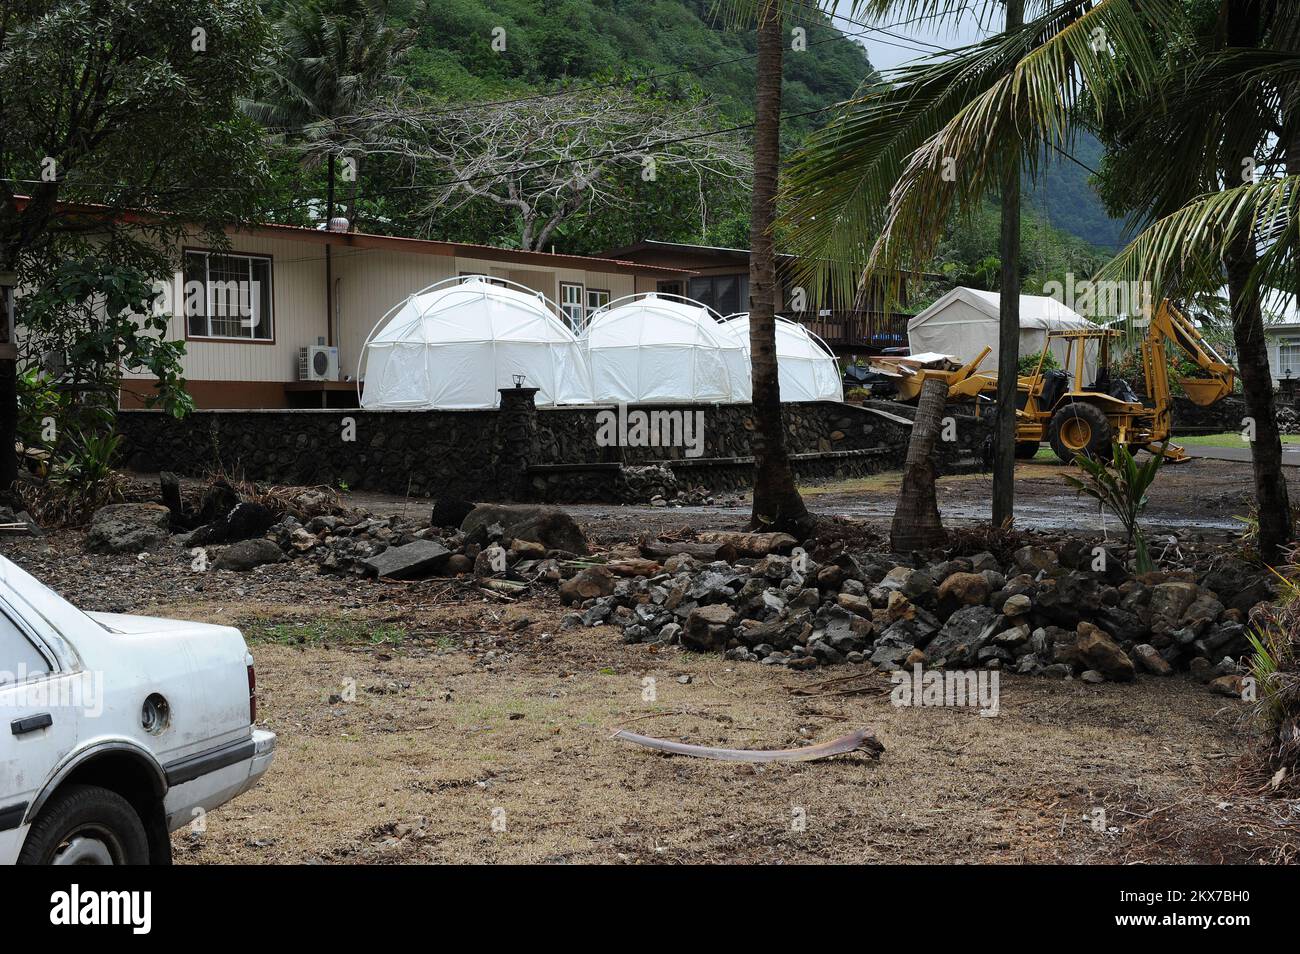 Three Federal Emergency Management Agency Tents. American Samoa Earthquake, Tsunami, and Flooding. Photographs Relating to Disasters and Emergency Management Programs, Activities, and Officials Stock Photo